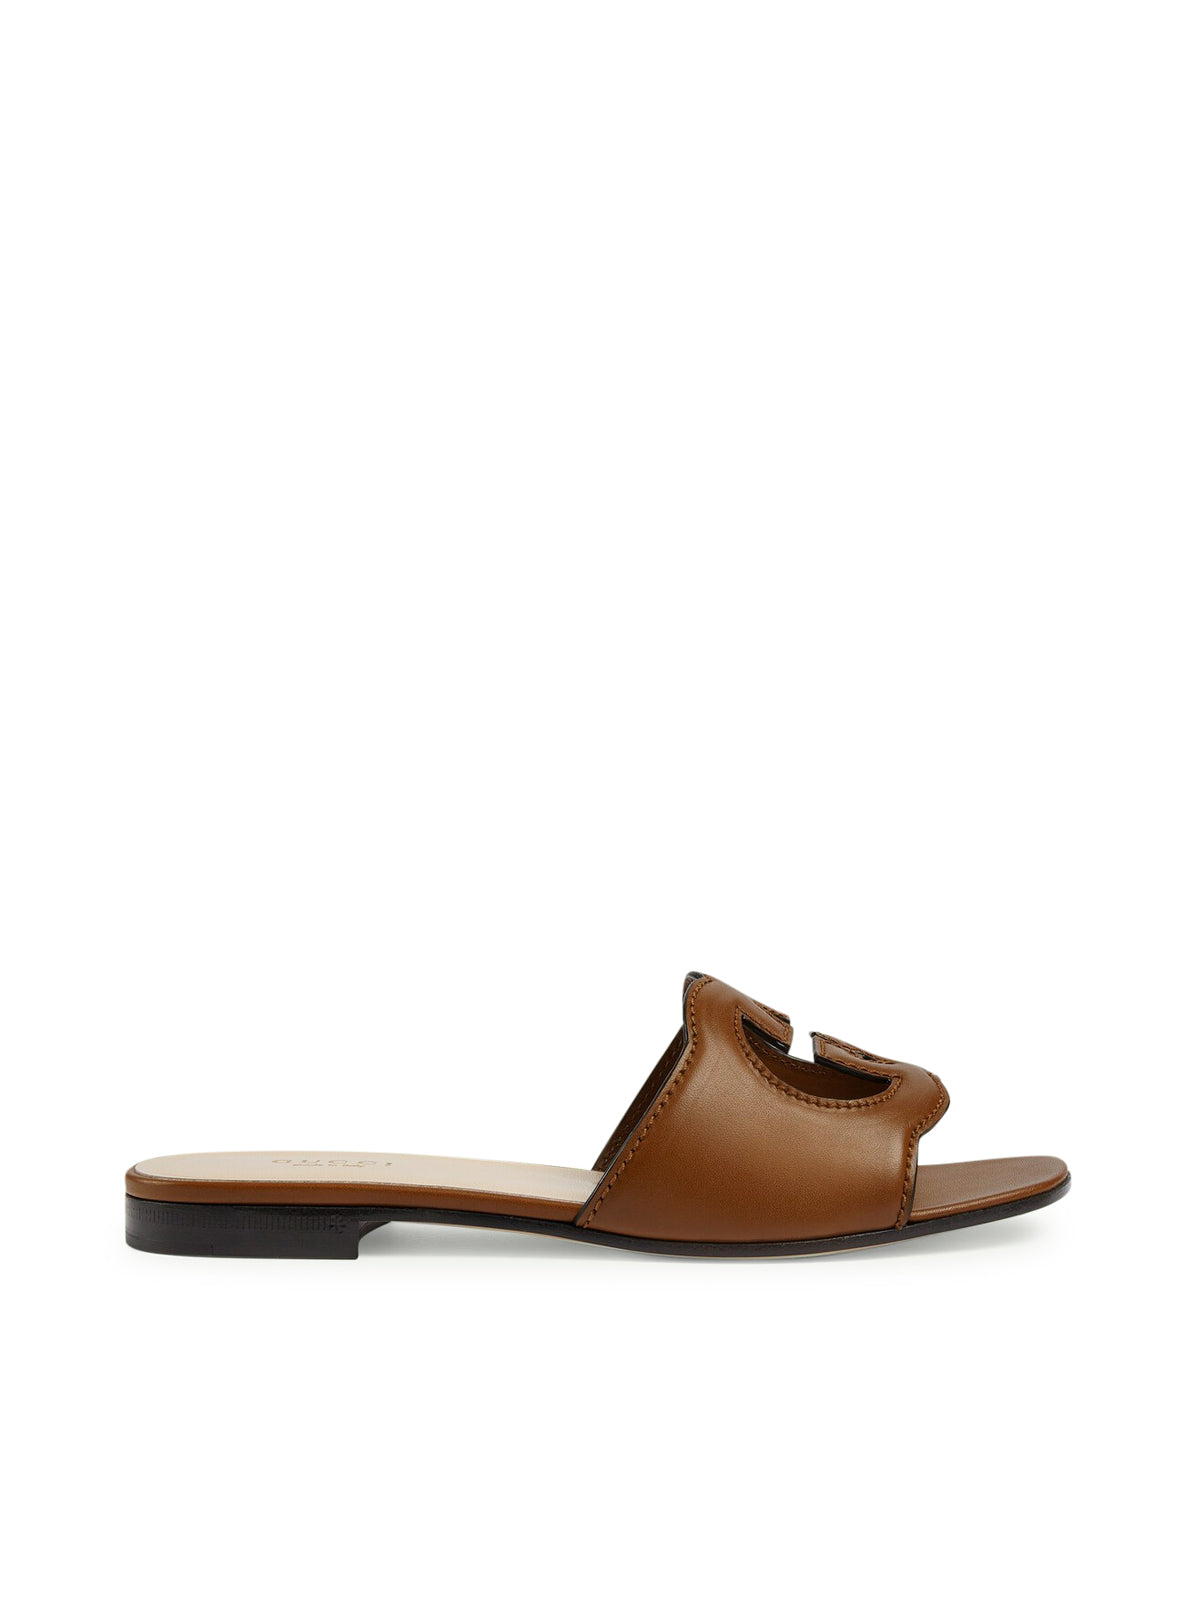 Women`s slider sandal with GG cut-out detail